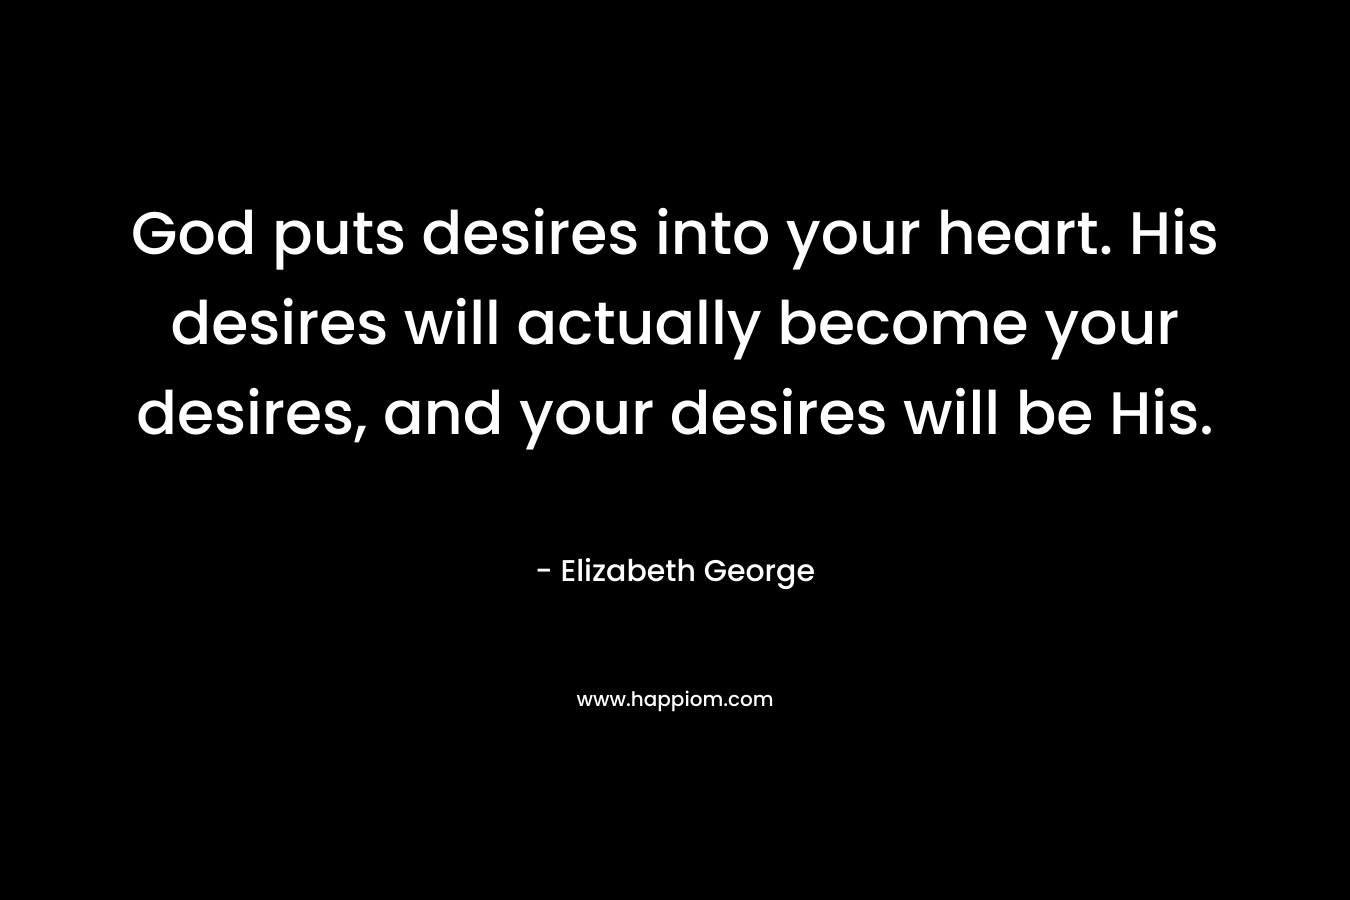 God puts desires into your heart. His desires will actually become your desires, and your desires will be His.